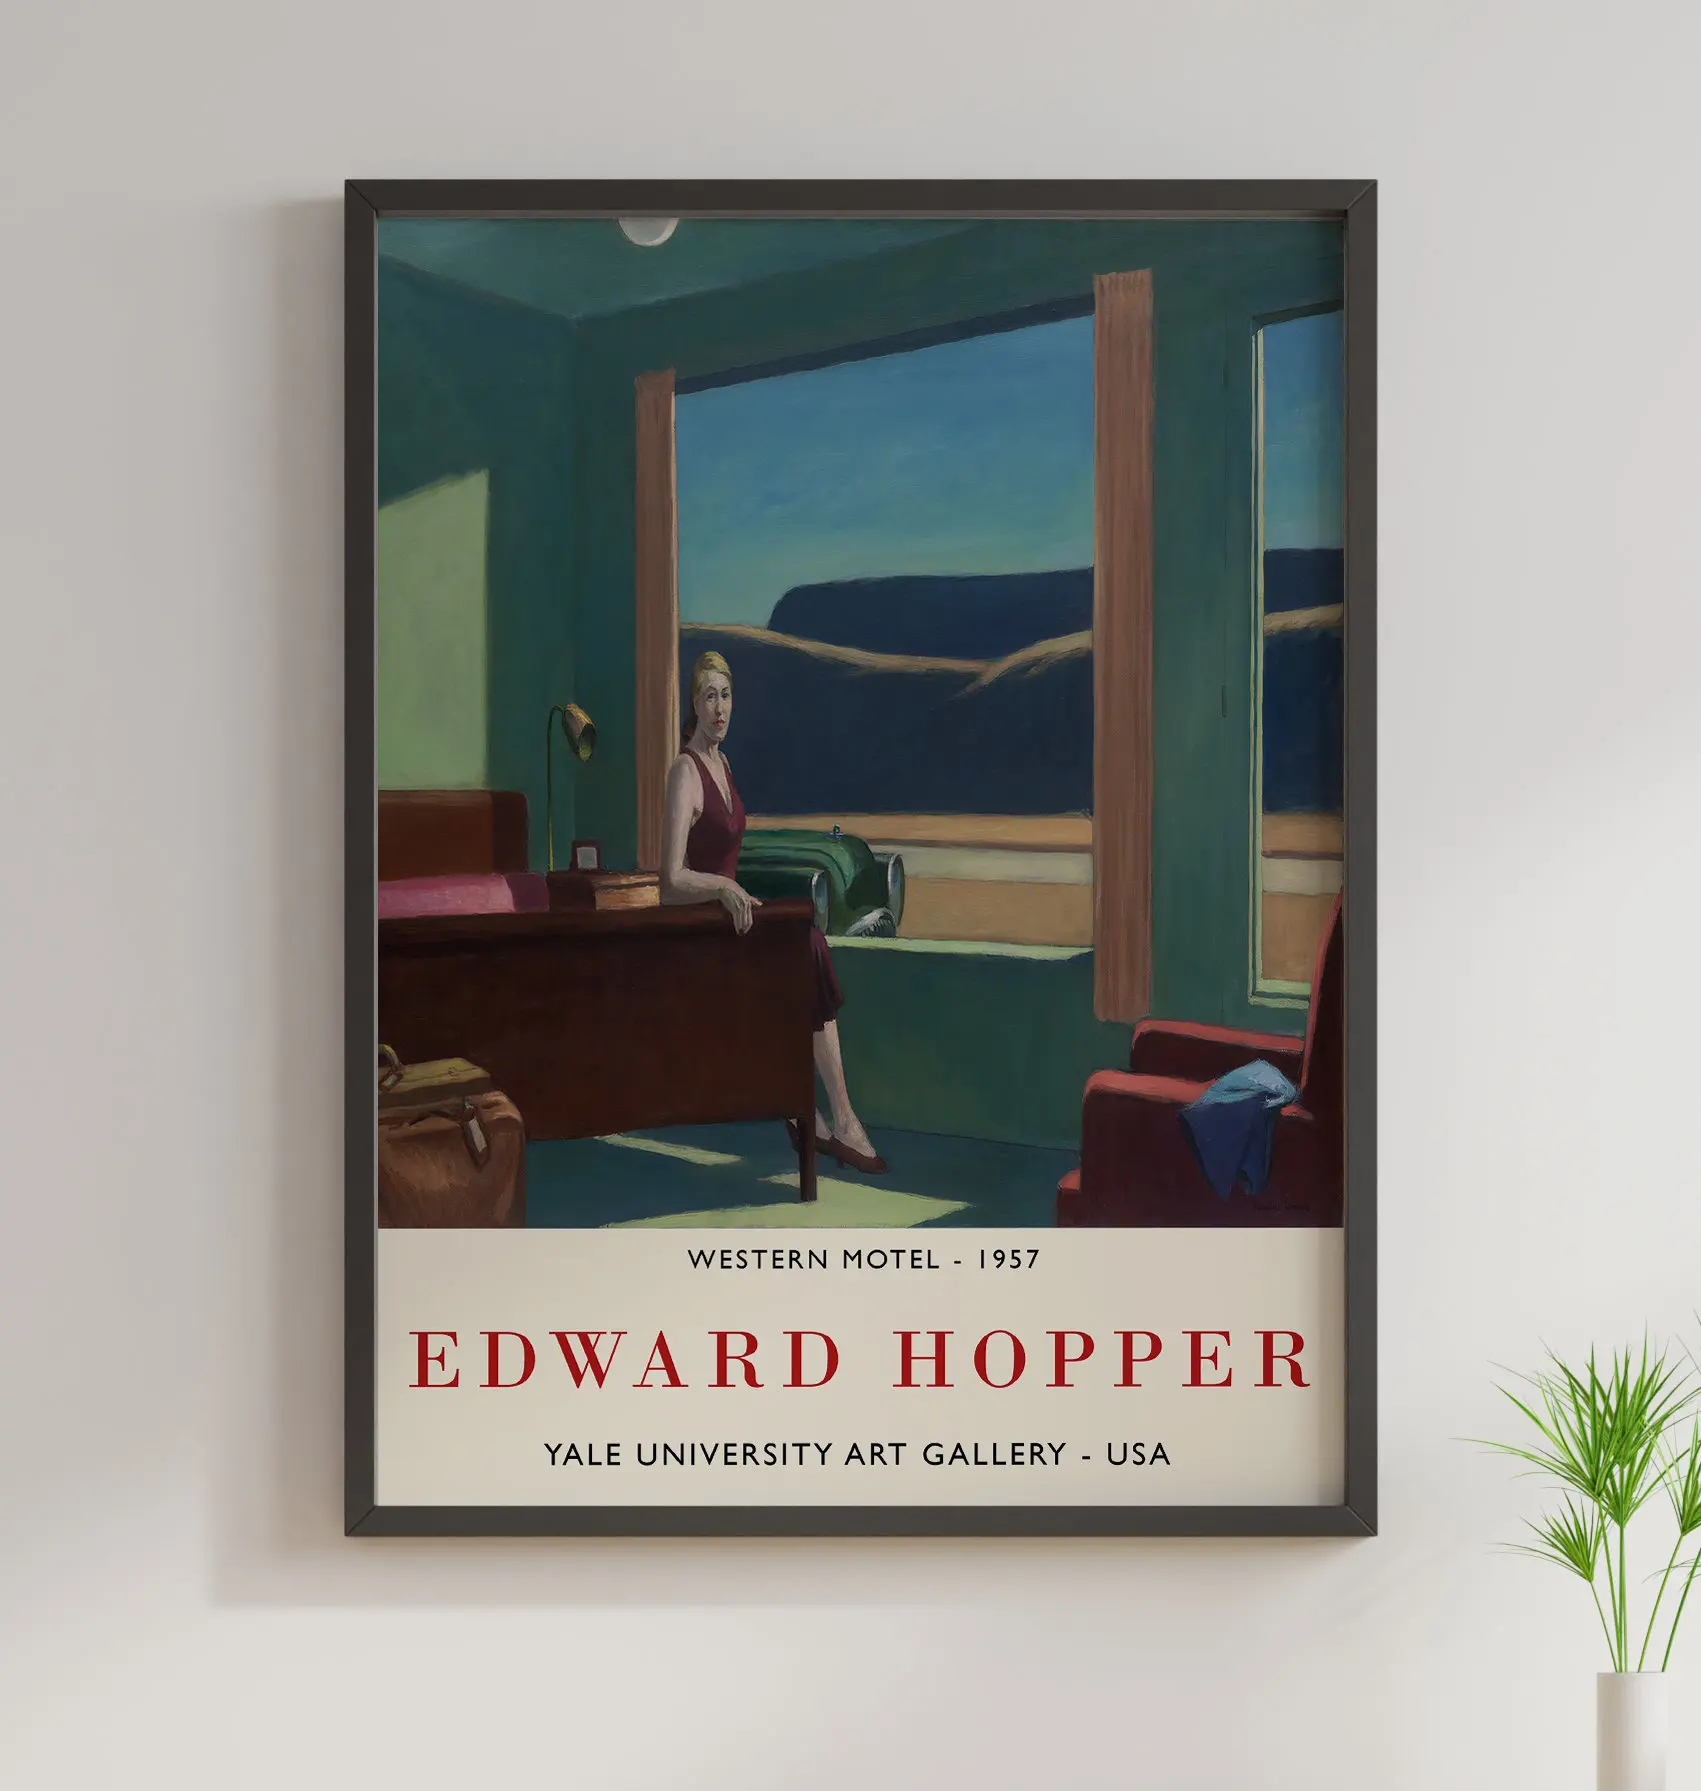 Edward Hopper Exhibition - Quality Print - Western Motel - Wall Decor - Poster Art Painting & Calligraphy - AliExpress